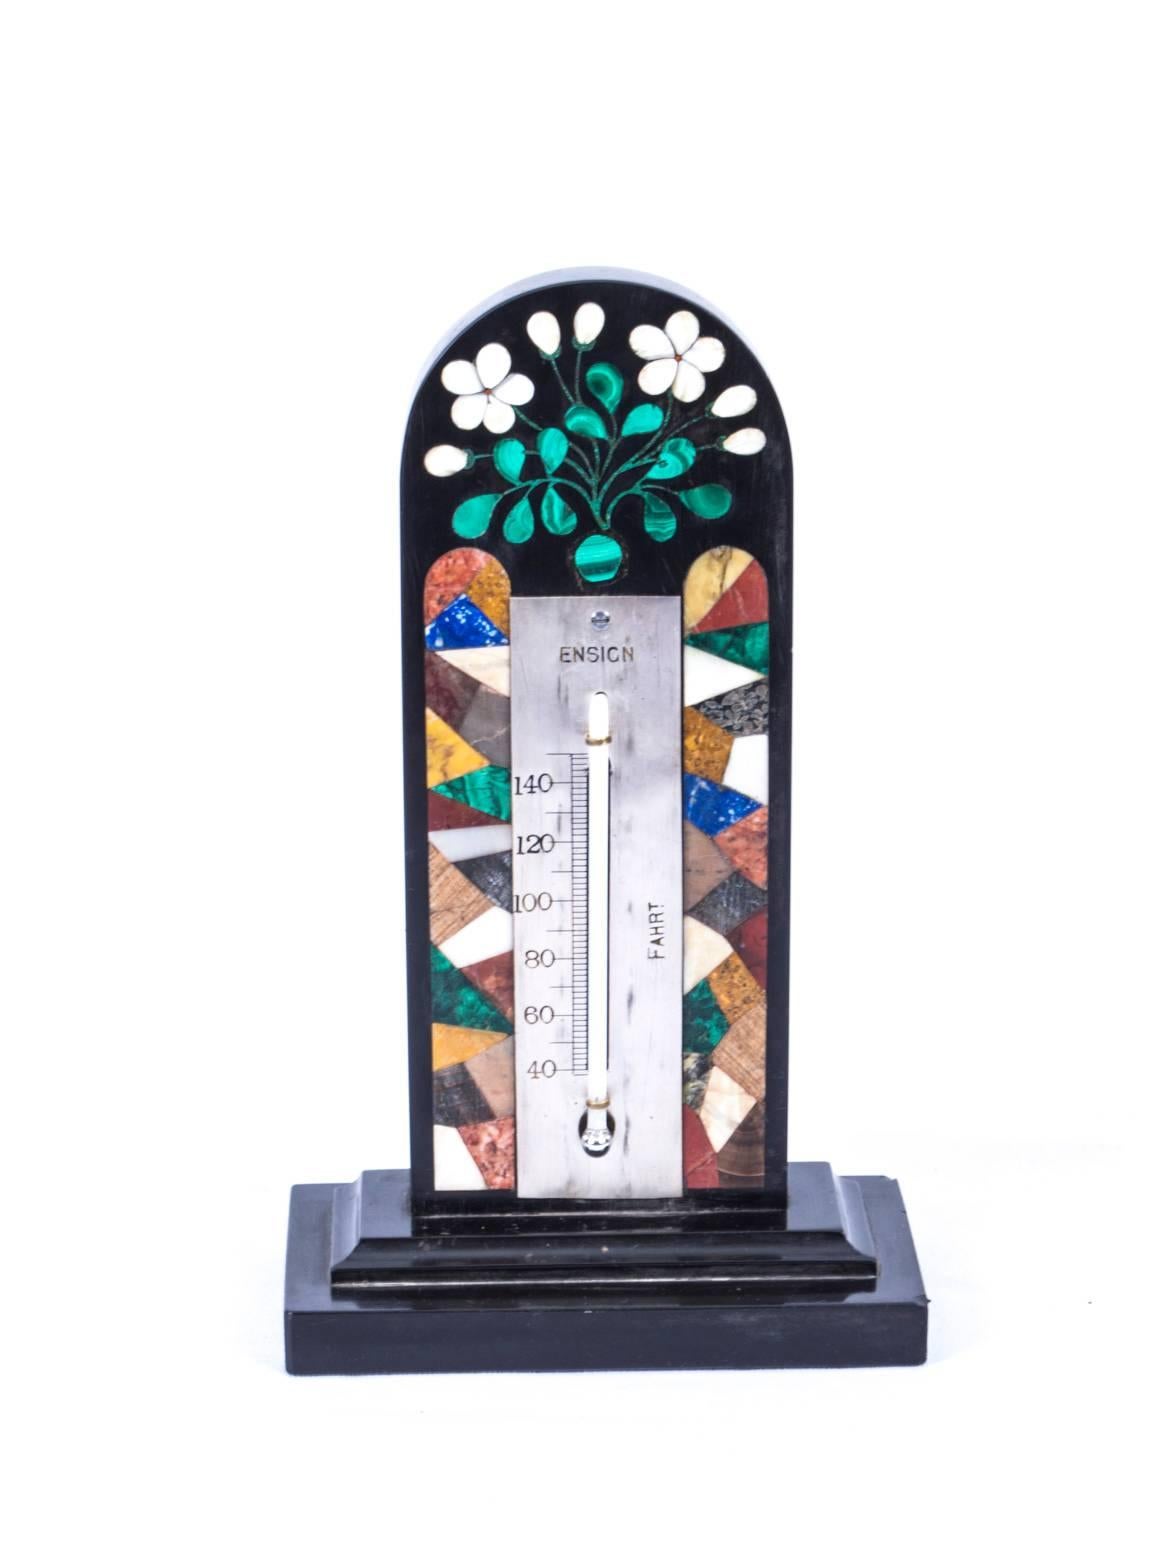 This is a wonderful Derbyshire Ashford marble thermometer, circa 1880 in date.

The thermometer features a silvered register engraved with ENSIGN, FAHRT and a central mercury tube.

The arched cresting is beautifully inlaid with a Pietra Dura of